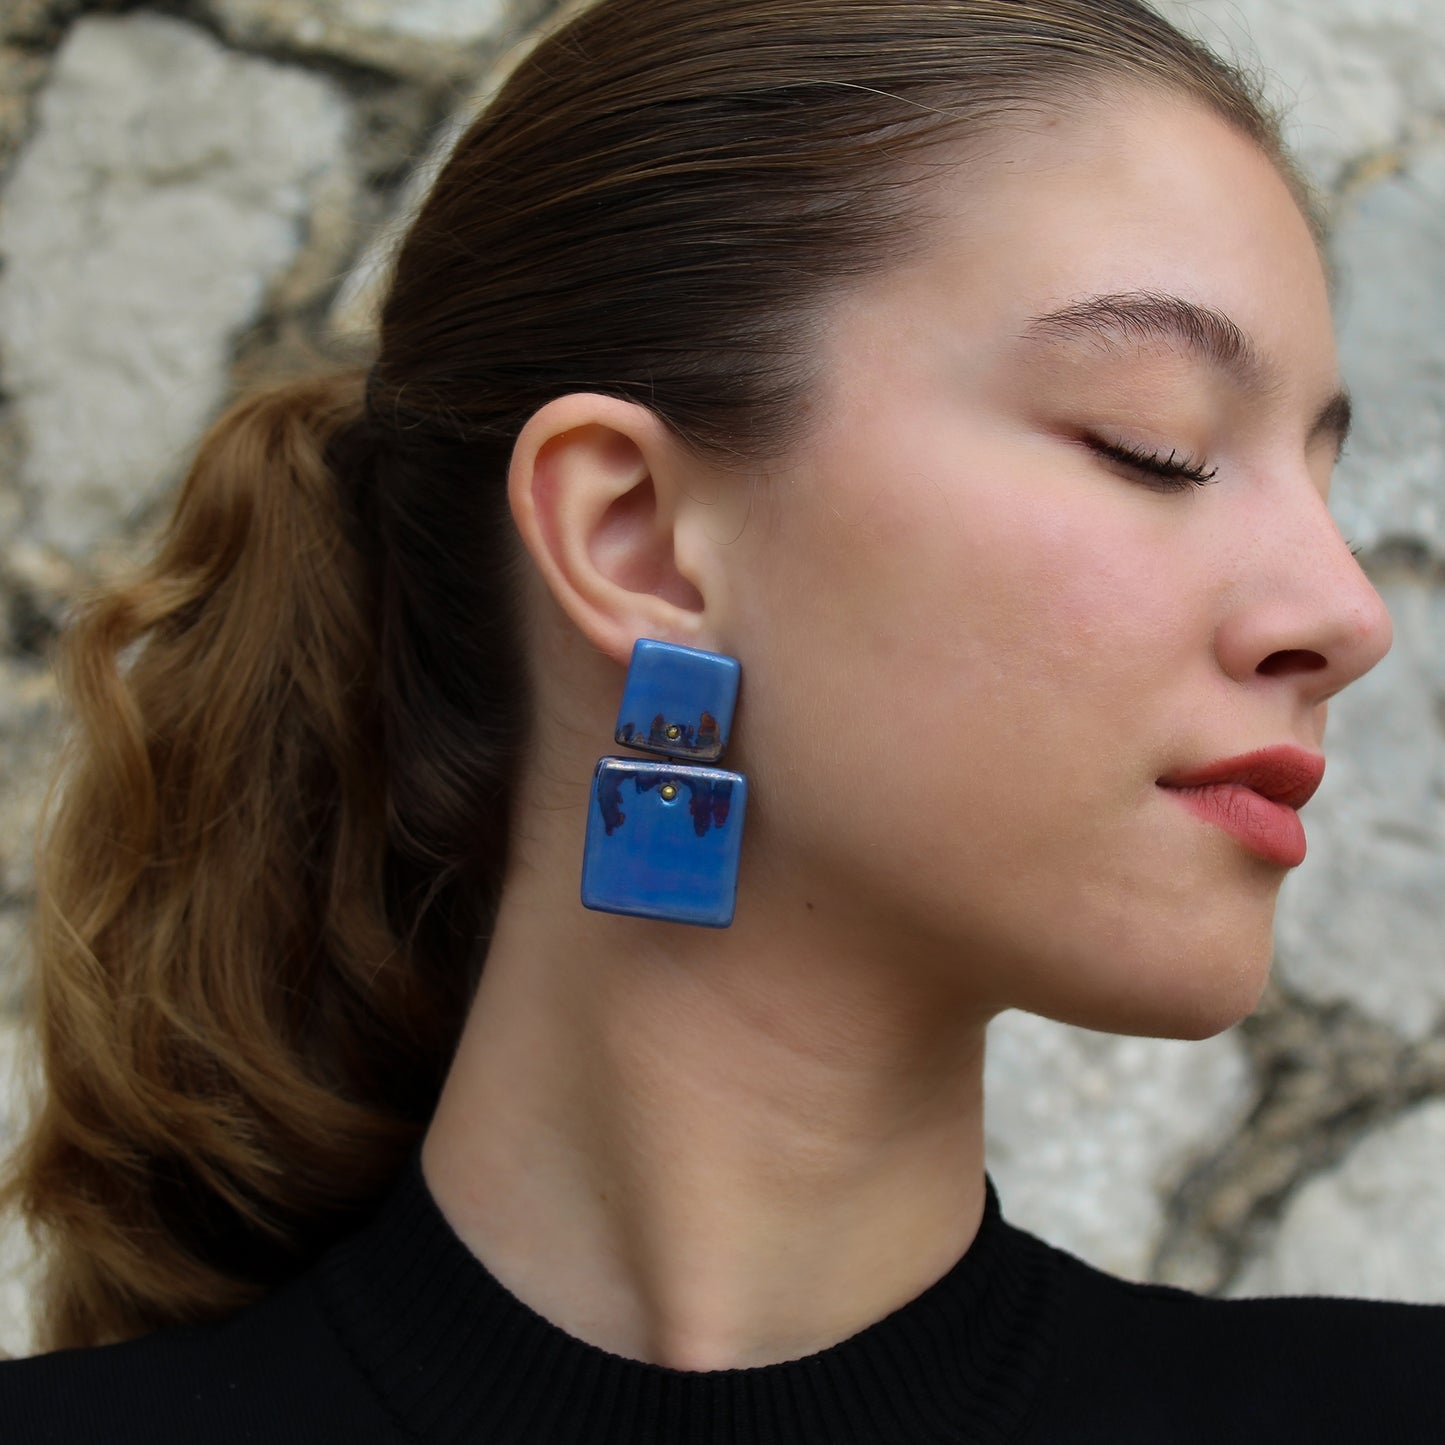 Handmade Stud Square Earrings in Blue Porcelain "Abstract gold"